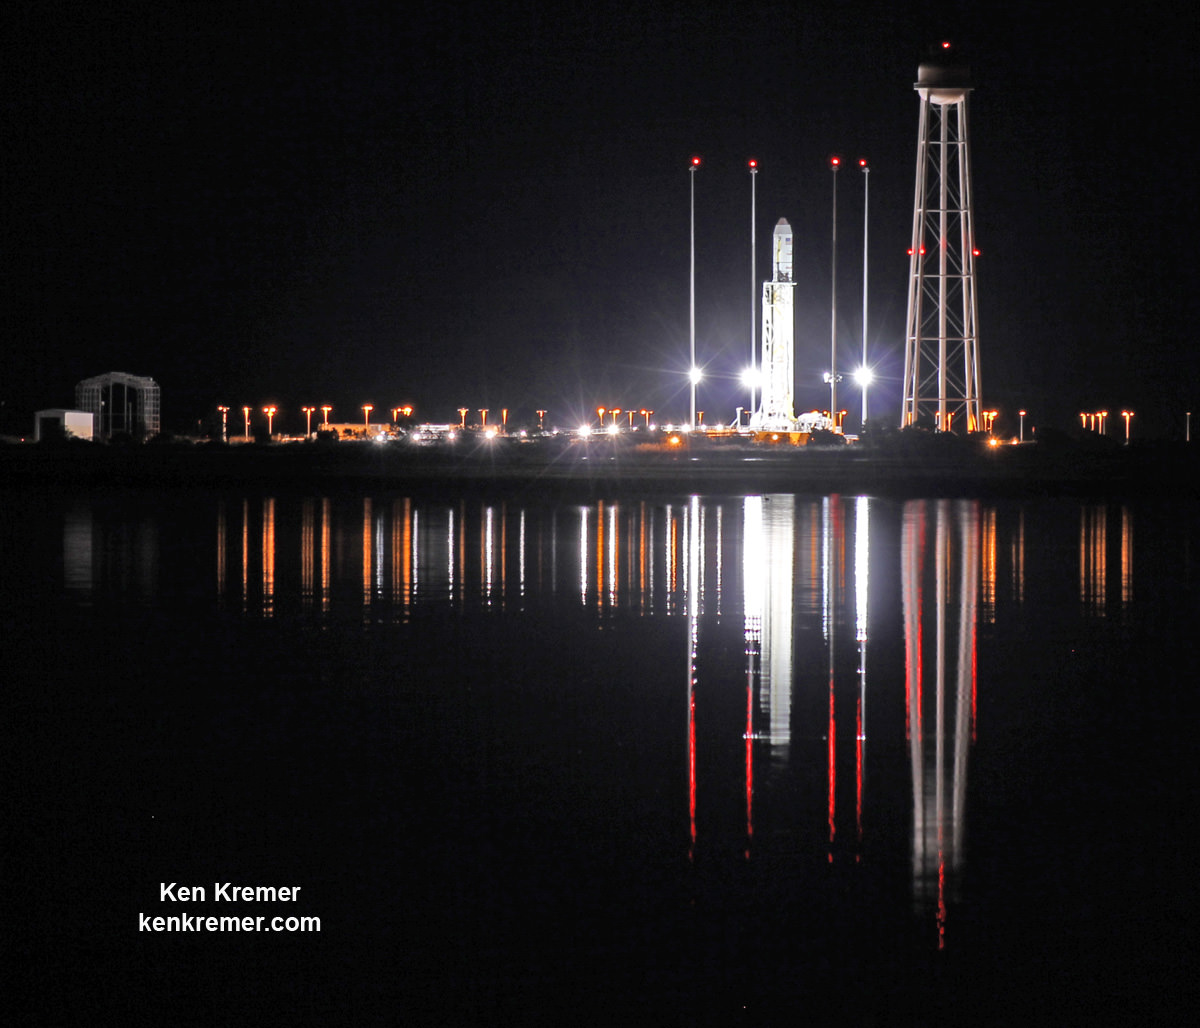 Antares rocket stands erect, reflecting off the calm waters the night before a launch from NASA’s Wallops Flight Facility, VA, on Oct. 28, 2014.    Credit: Ken Kremer/kenkremer.com